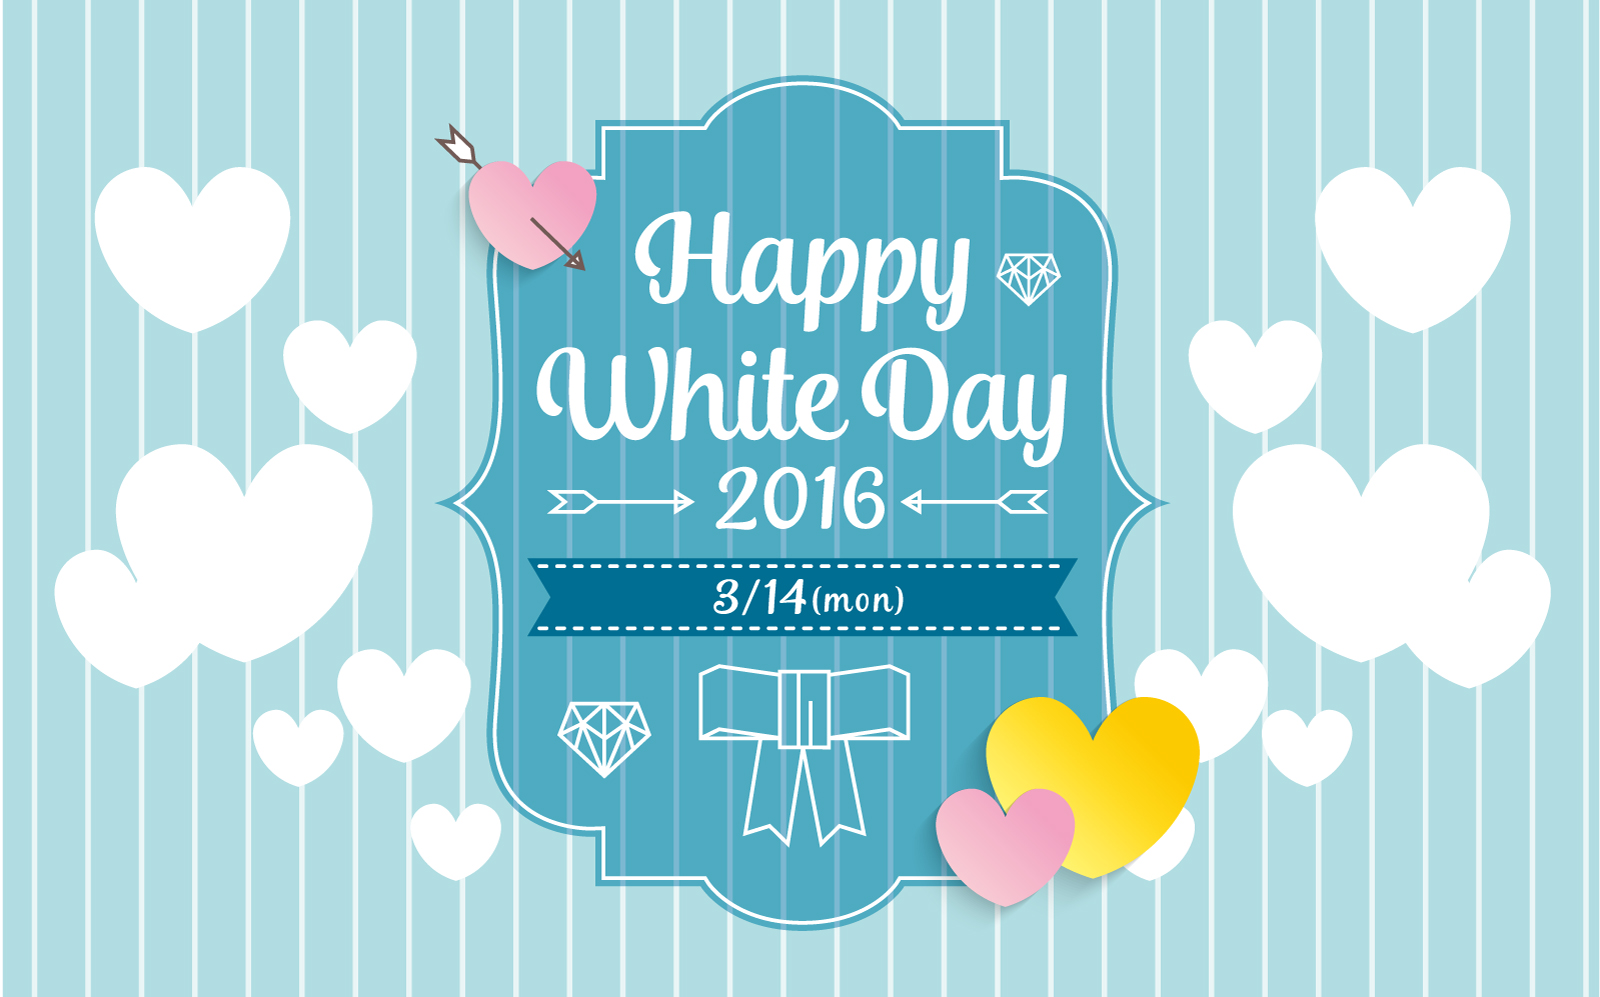 Happy White Day Illustrations & Clip Art For Free Download